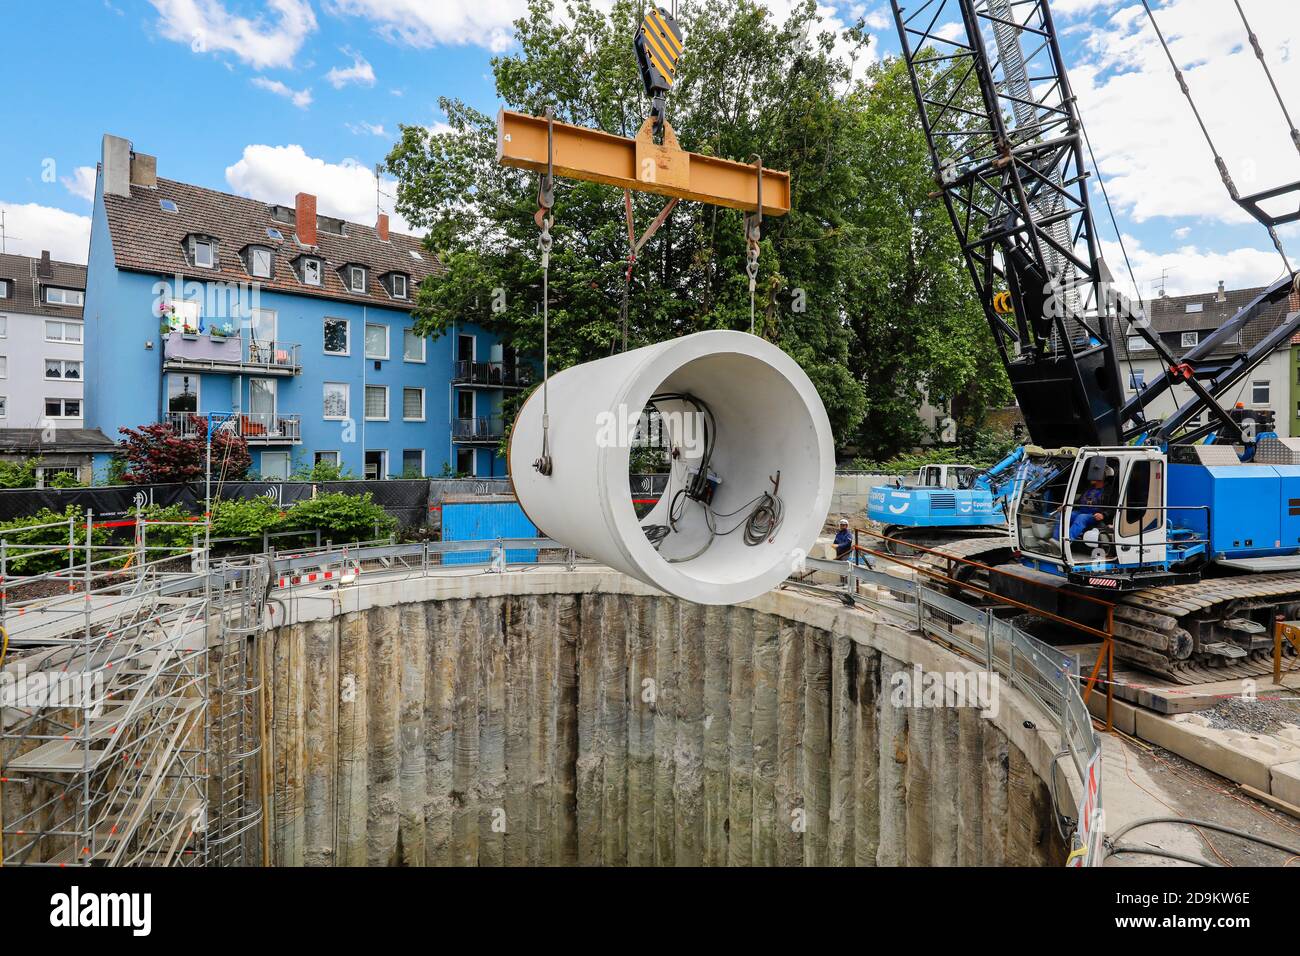 New construction of the Berne sewer, lifting the sewer pipe into the shaft during tunneling, the Berne belongs to the Emscher river system, was previously an open, above-ground wastewater sewer, Emscher conversion, Essen, Ruhr area, North Rhine-Westphalia, Germany Stock Photo